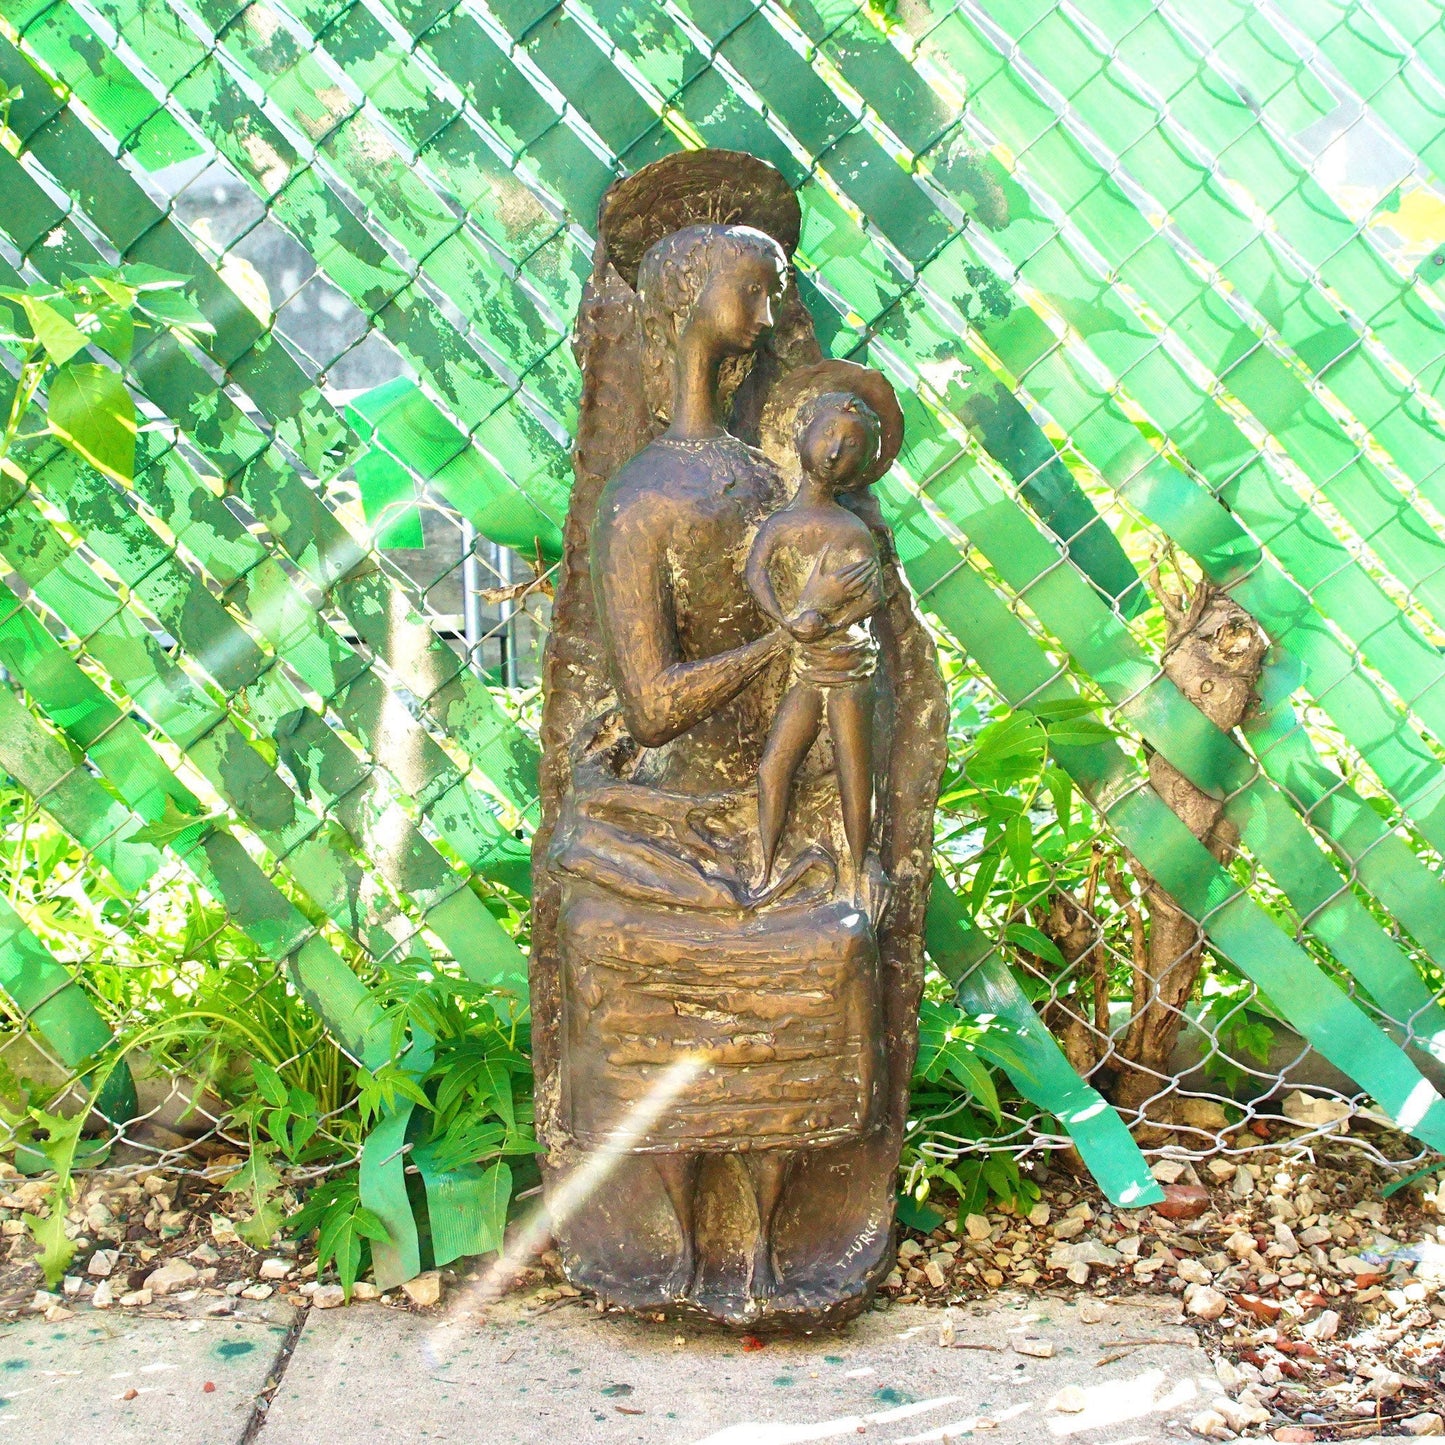 Vintage bronze sculpture depicting an abstract, stylized Mother Mary holding baby Jesus, created by Italian artist Toni Furlan. The statue has an aged patina and stands approximately 36 inches tall, set against a vibrant green tiled background.